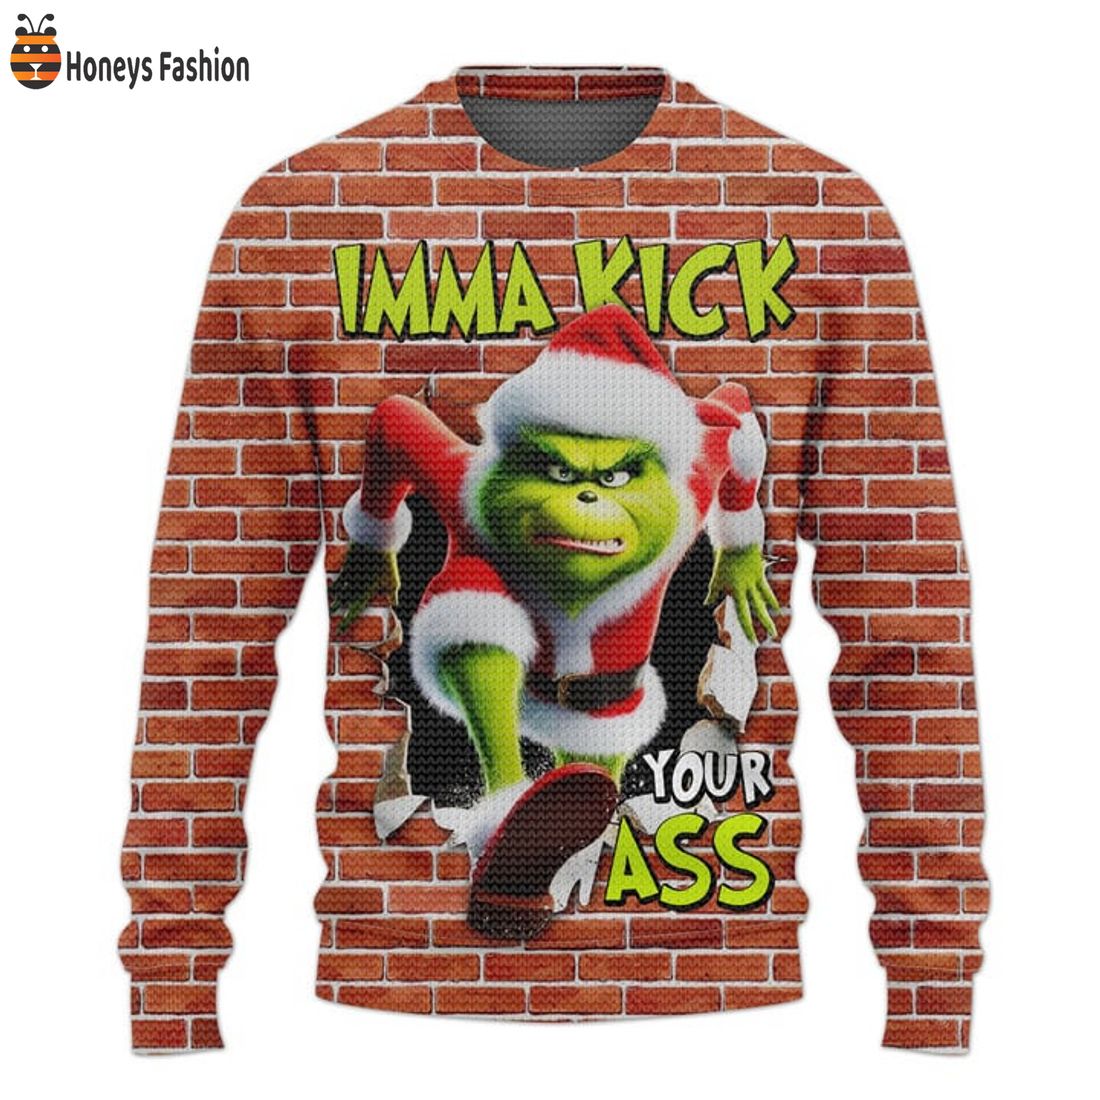 TOP The Grinch Imma Kick You Ass Oops Ugly Christmas Sweater